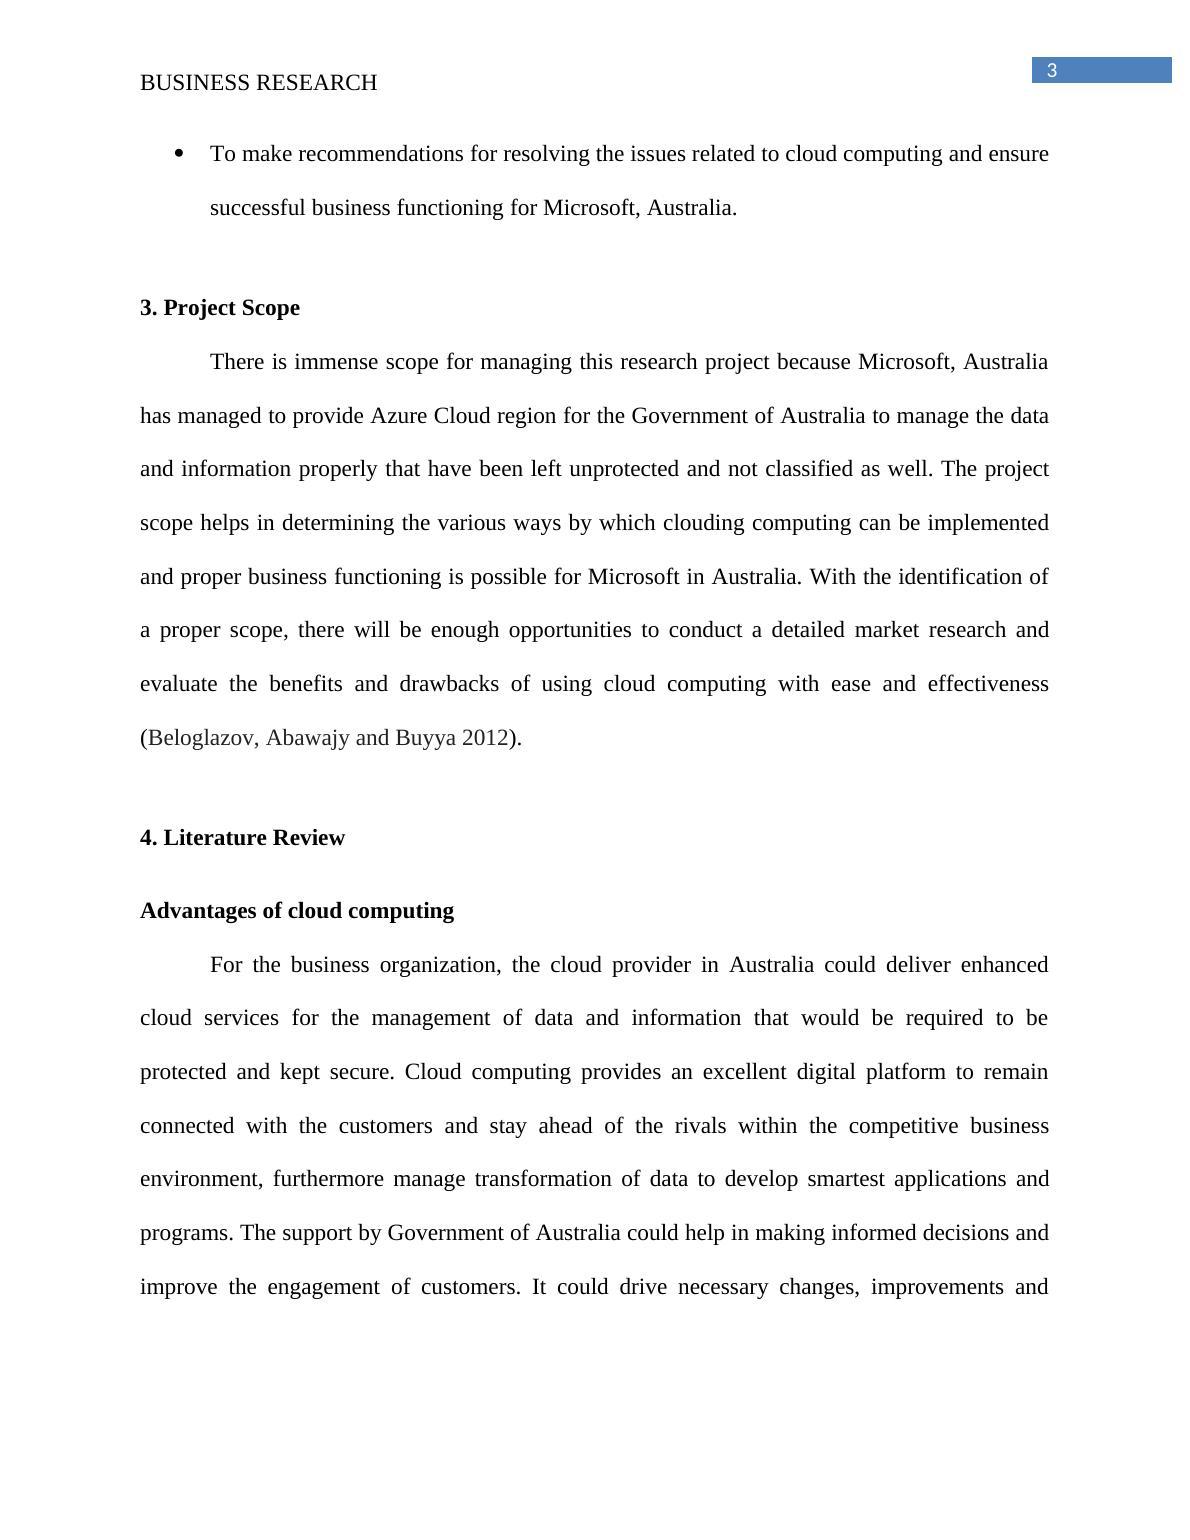 Research Proposal on Using Cloud-computing Technology_4